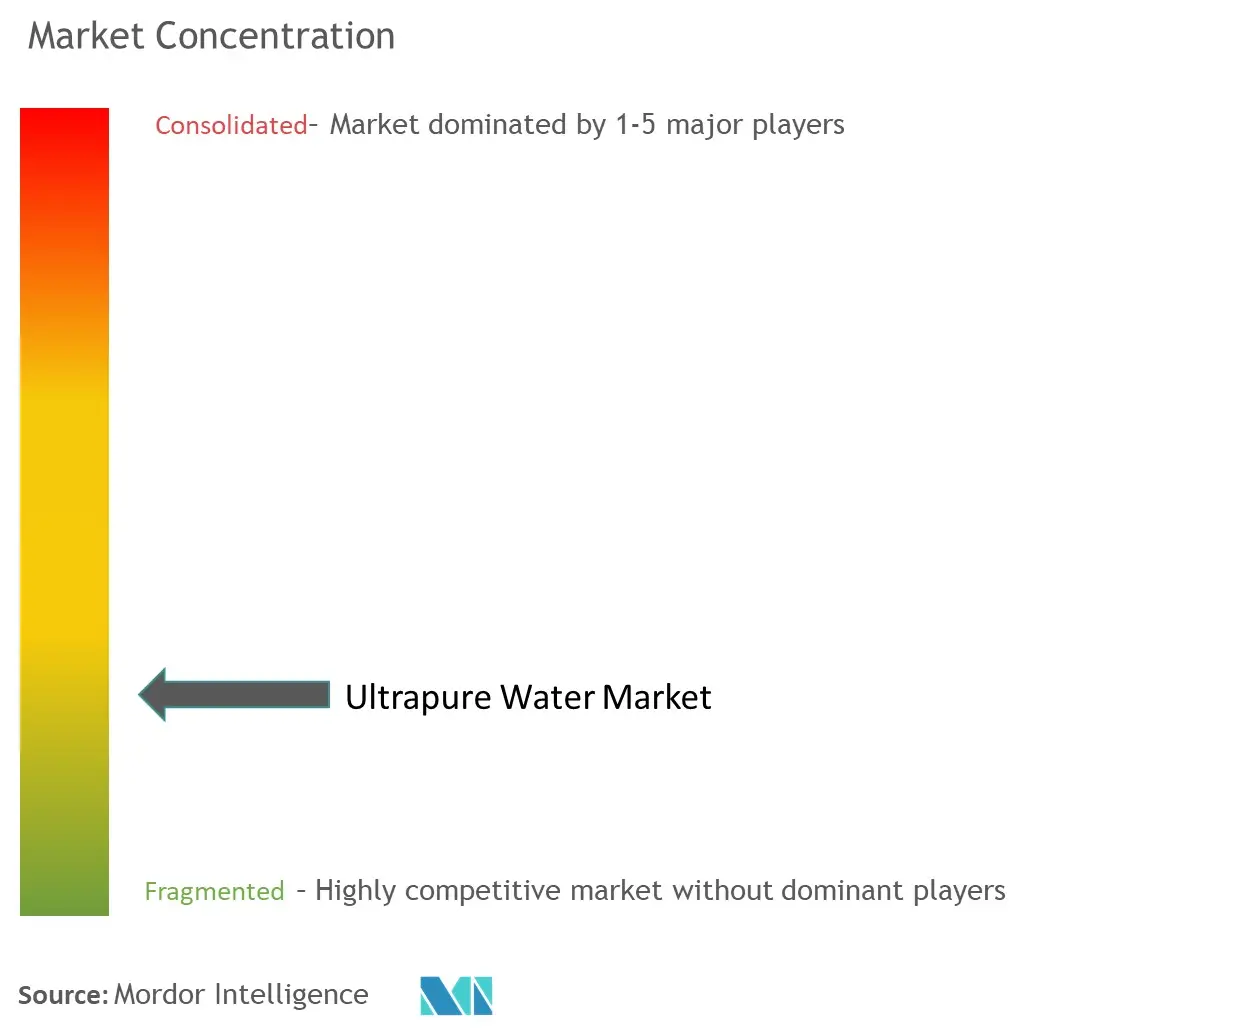 Ultrapure Water Market Concentration